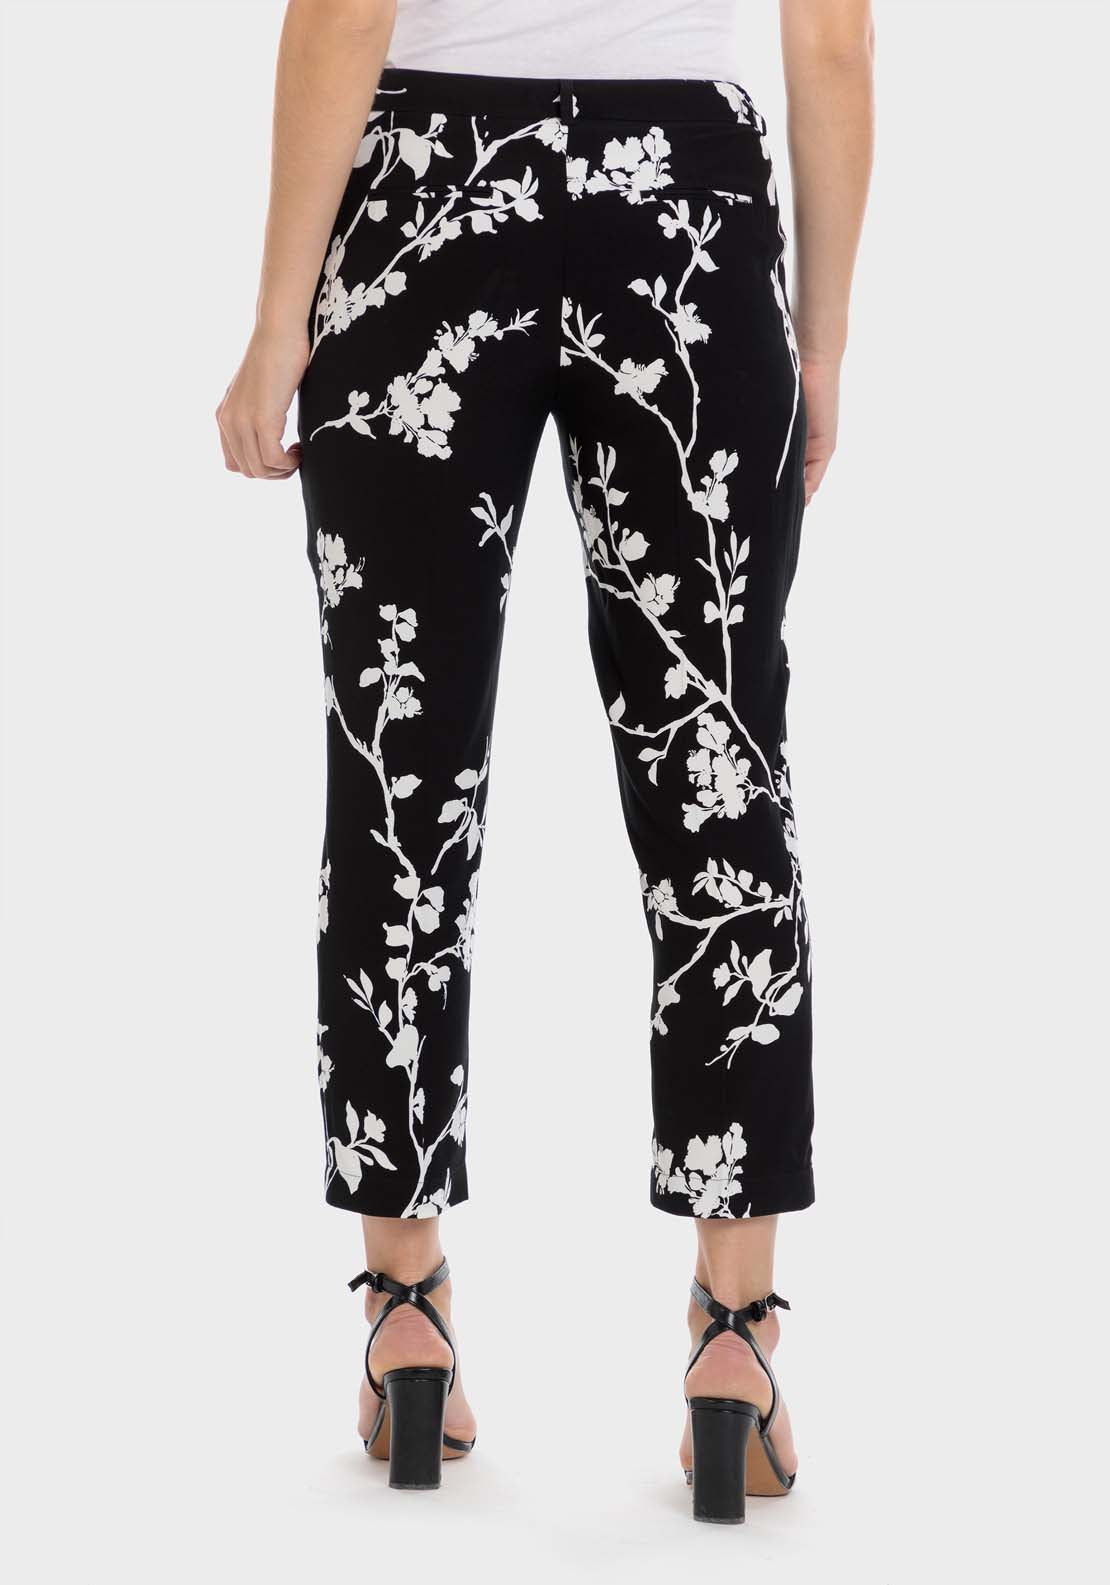 Punt Roma Floral Print Trousers - Black 2 Shaws Department Stores